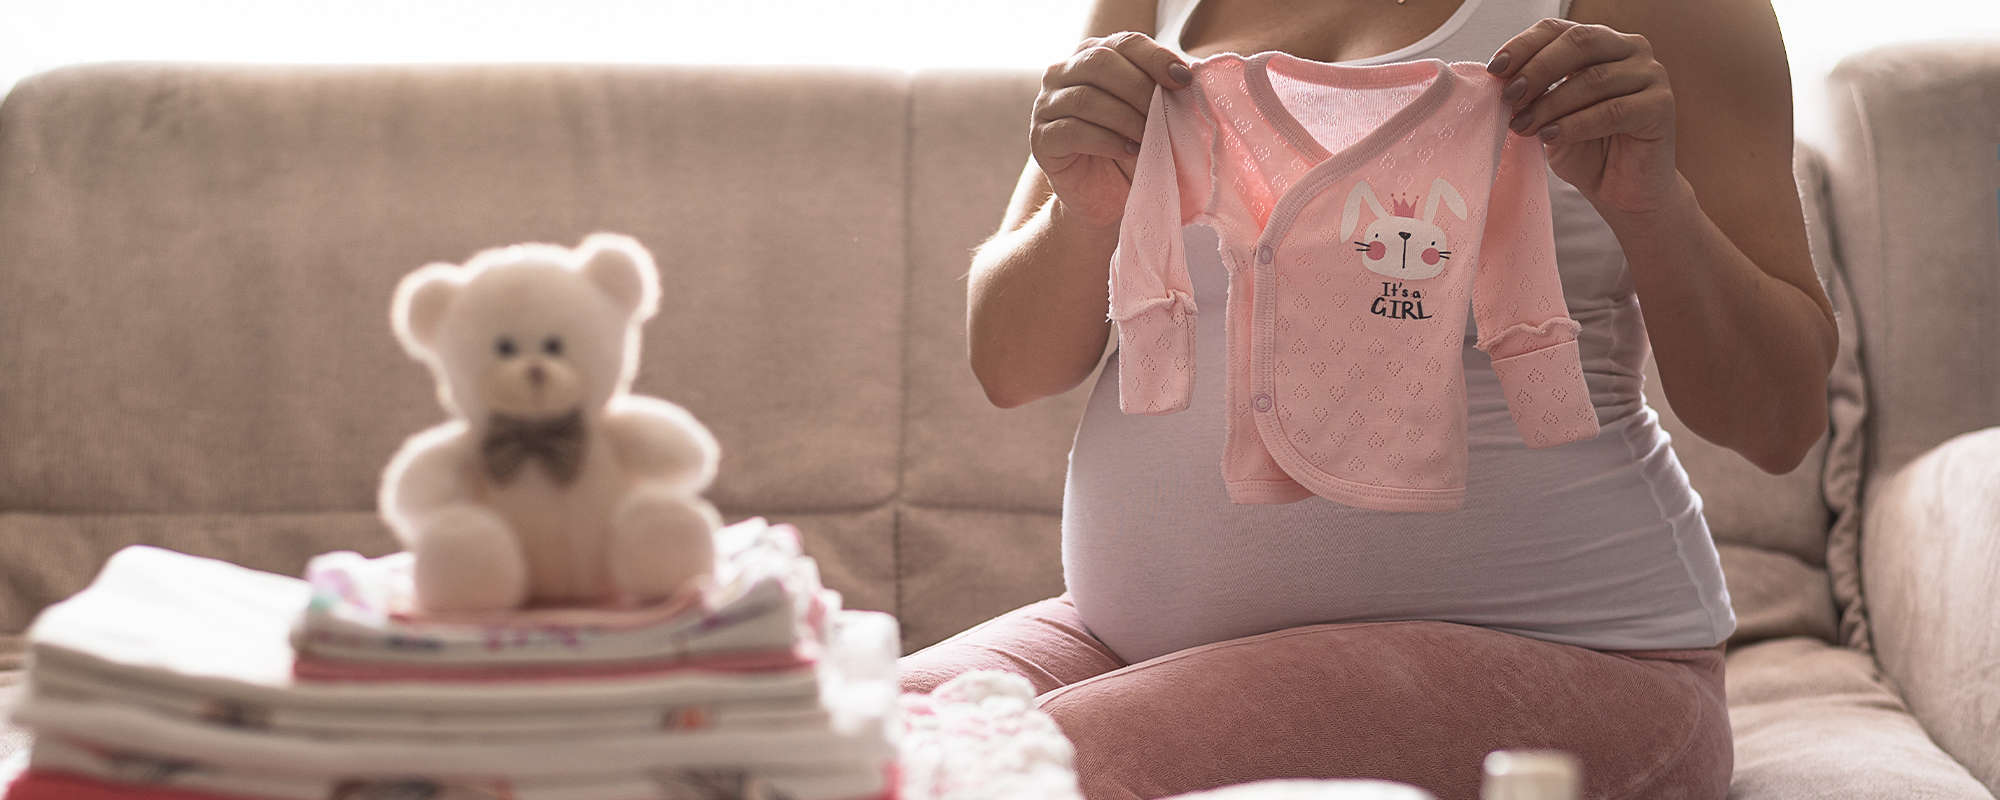 13 Essentials to Prepare for Your Baby’s Birth & Beyond